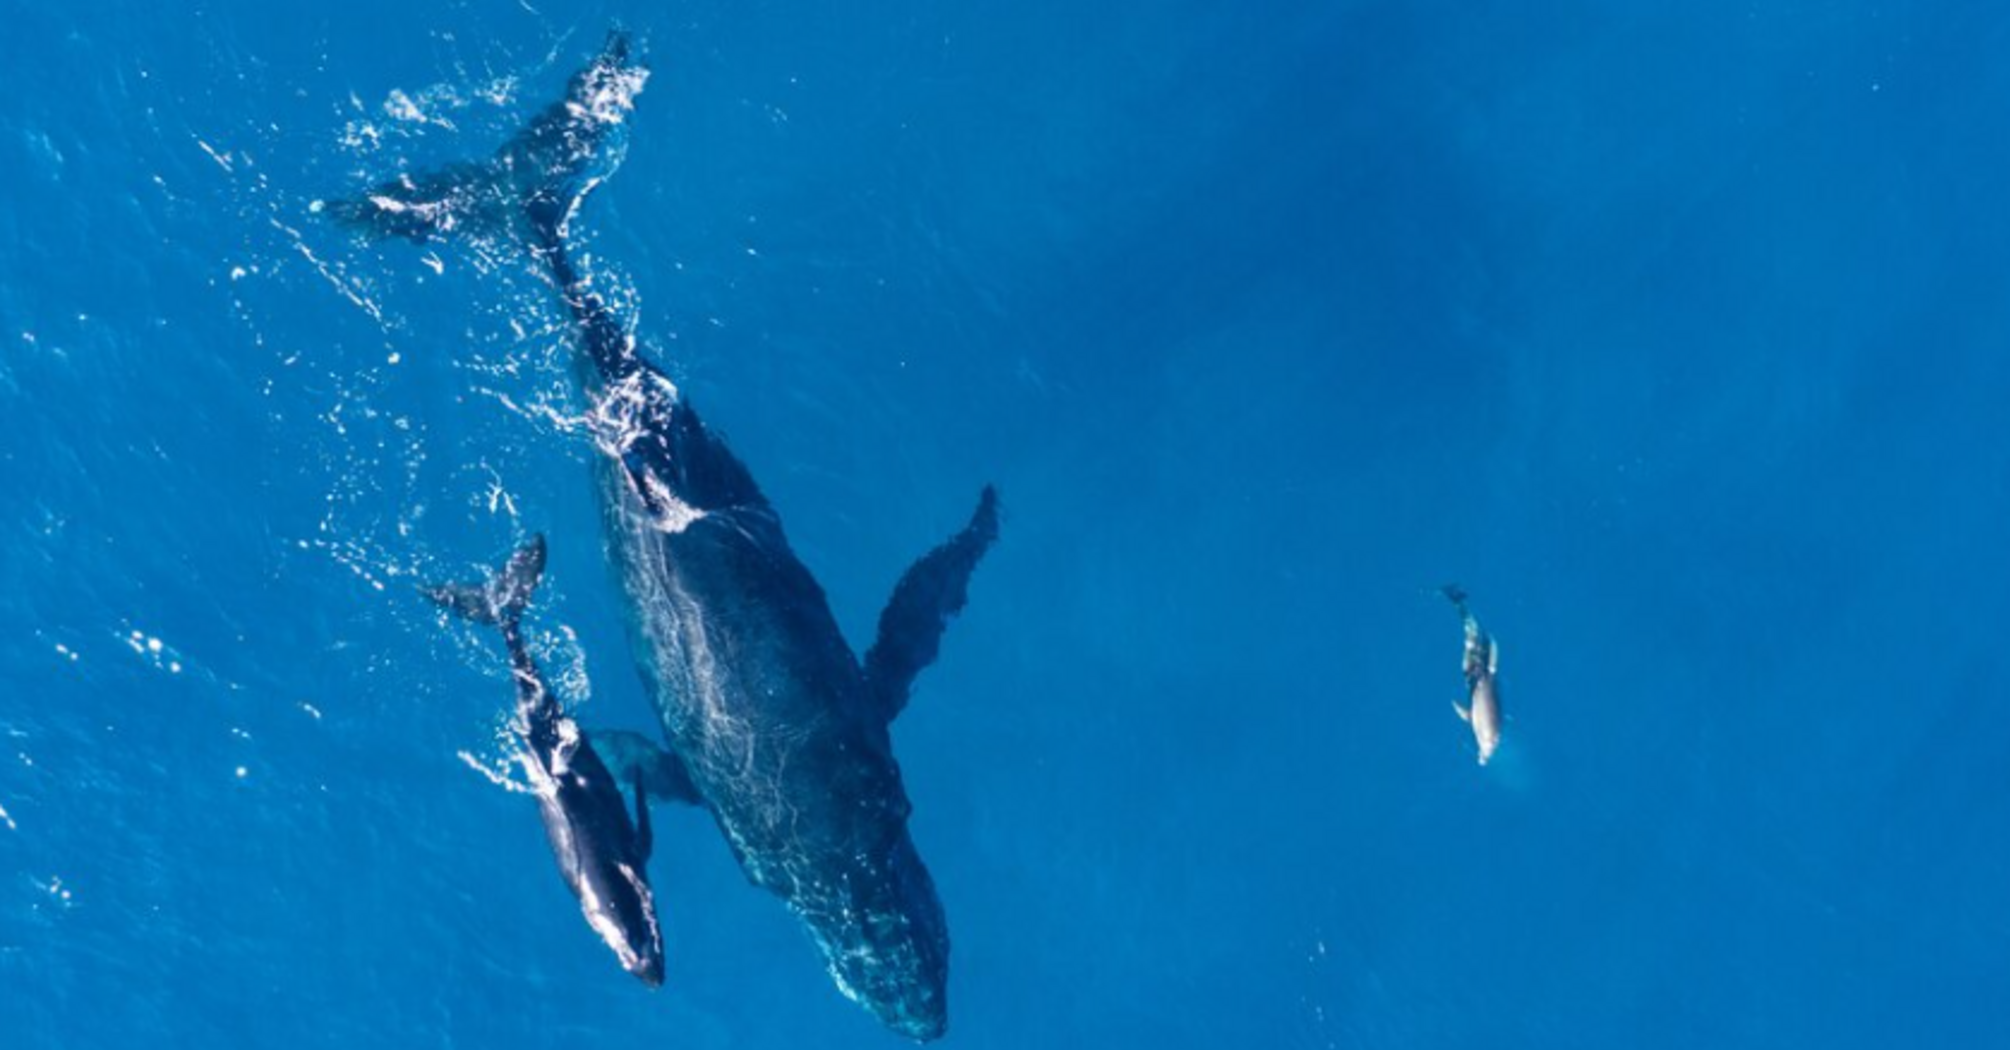 For the first time in the world: Dominica creates a sanctuary for sperm whales